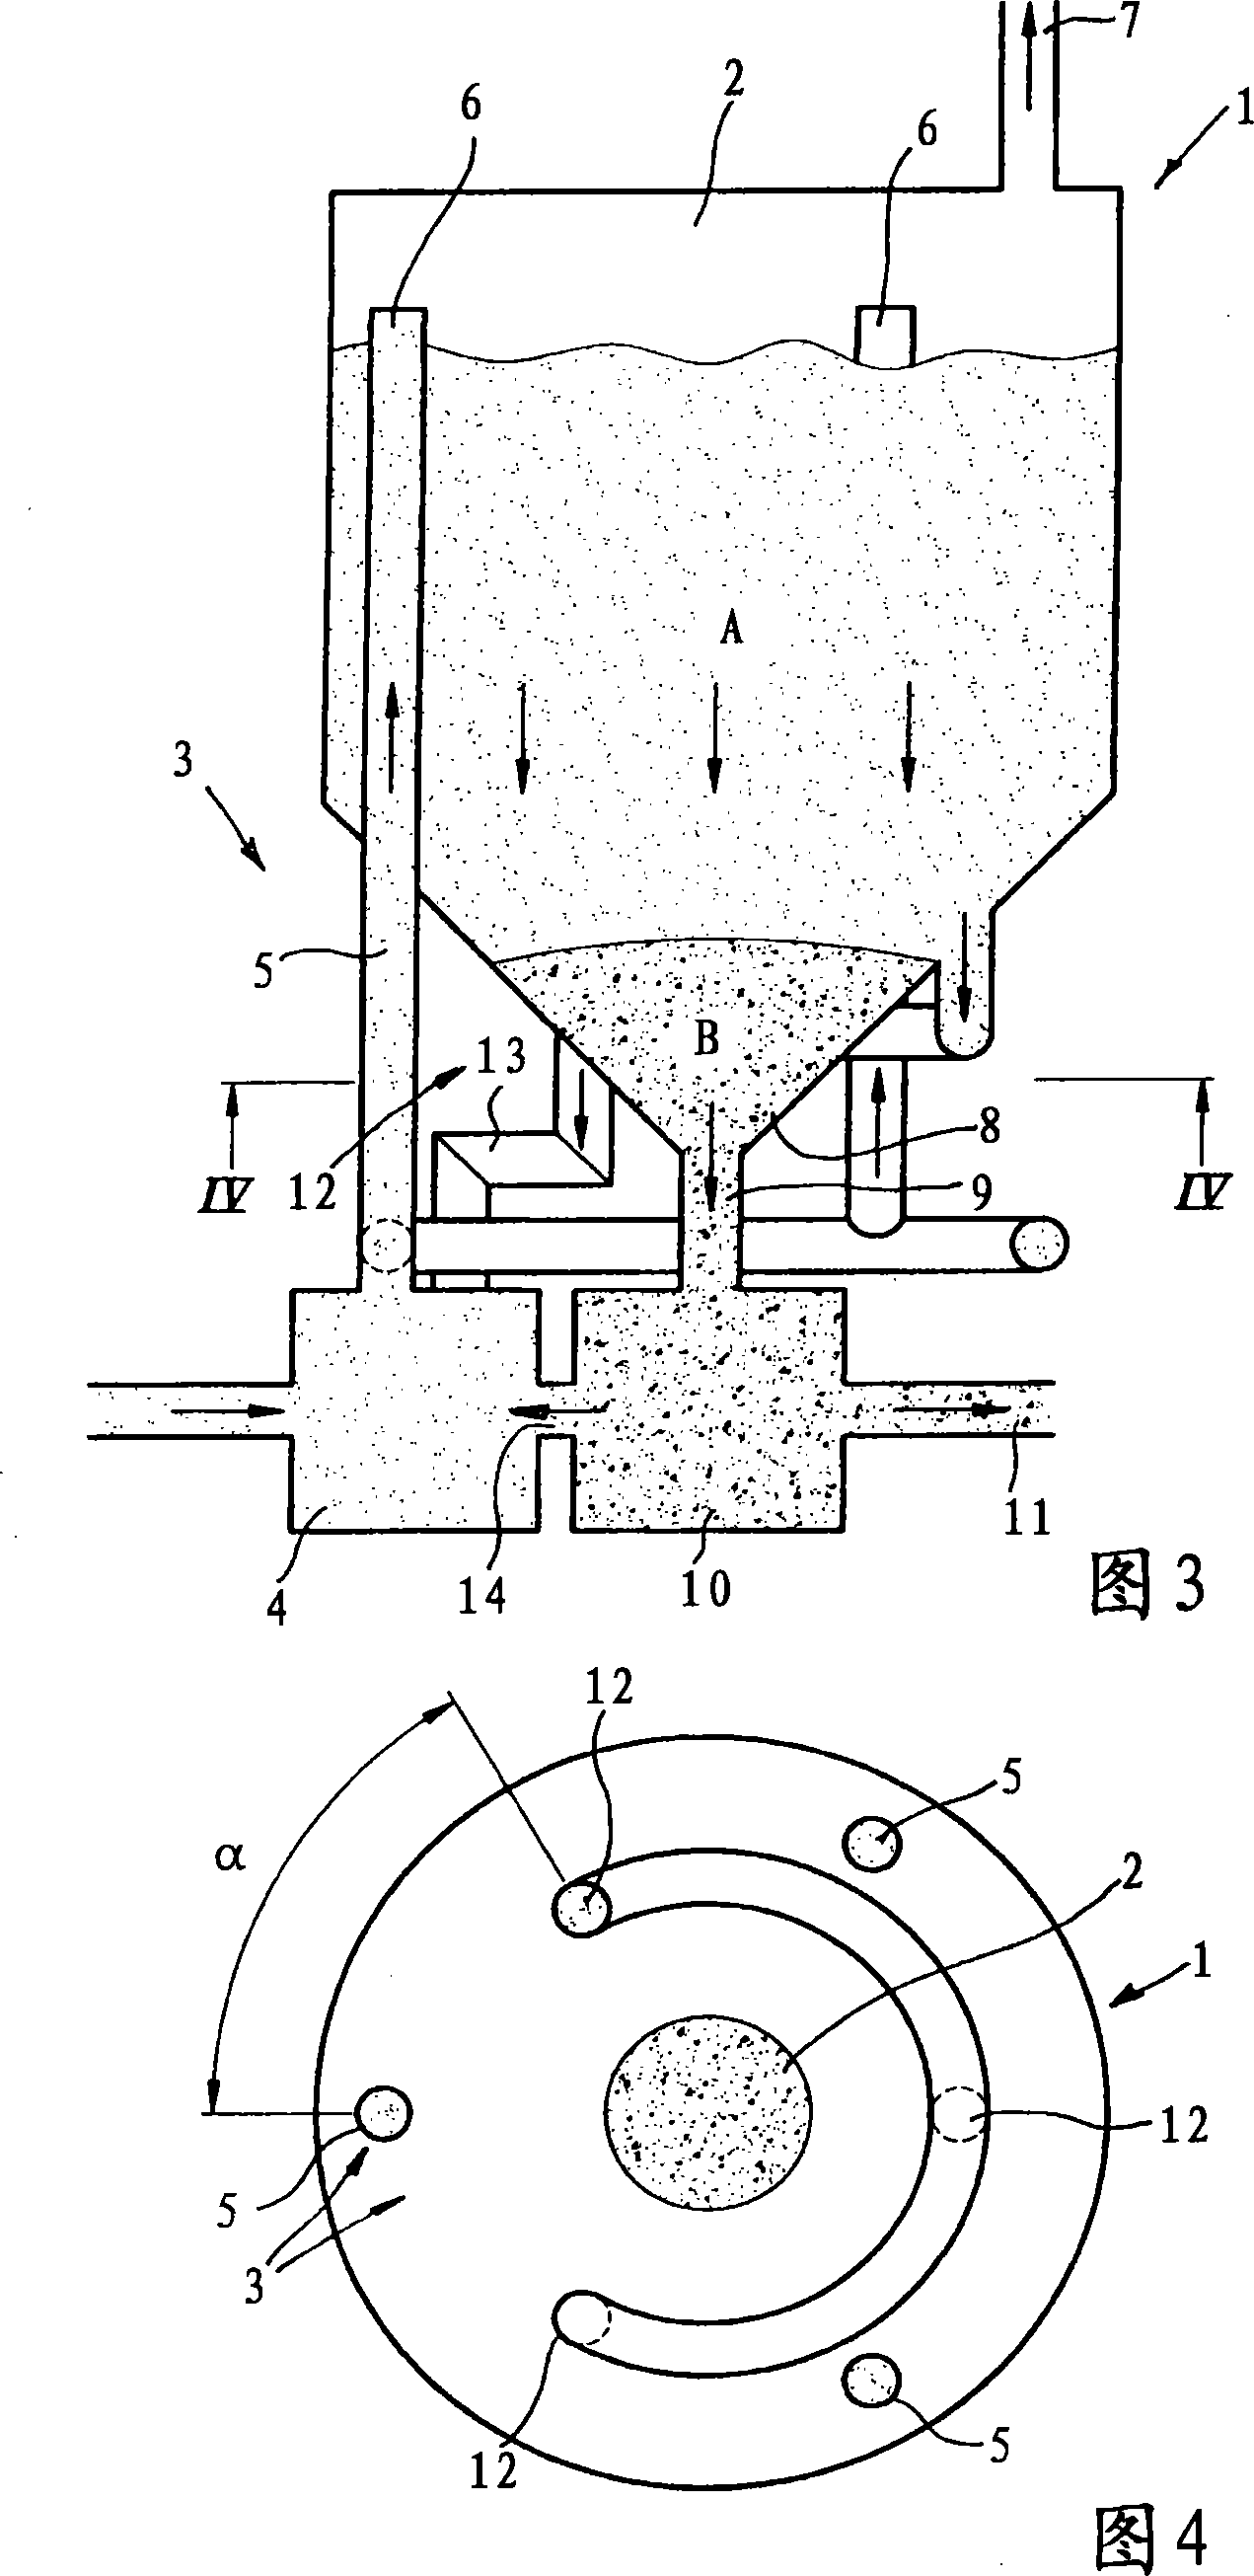 Method and device for the anaerobic fermentation of organic material